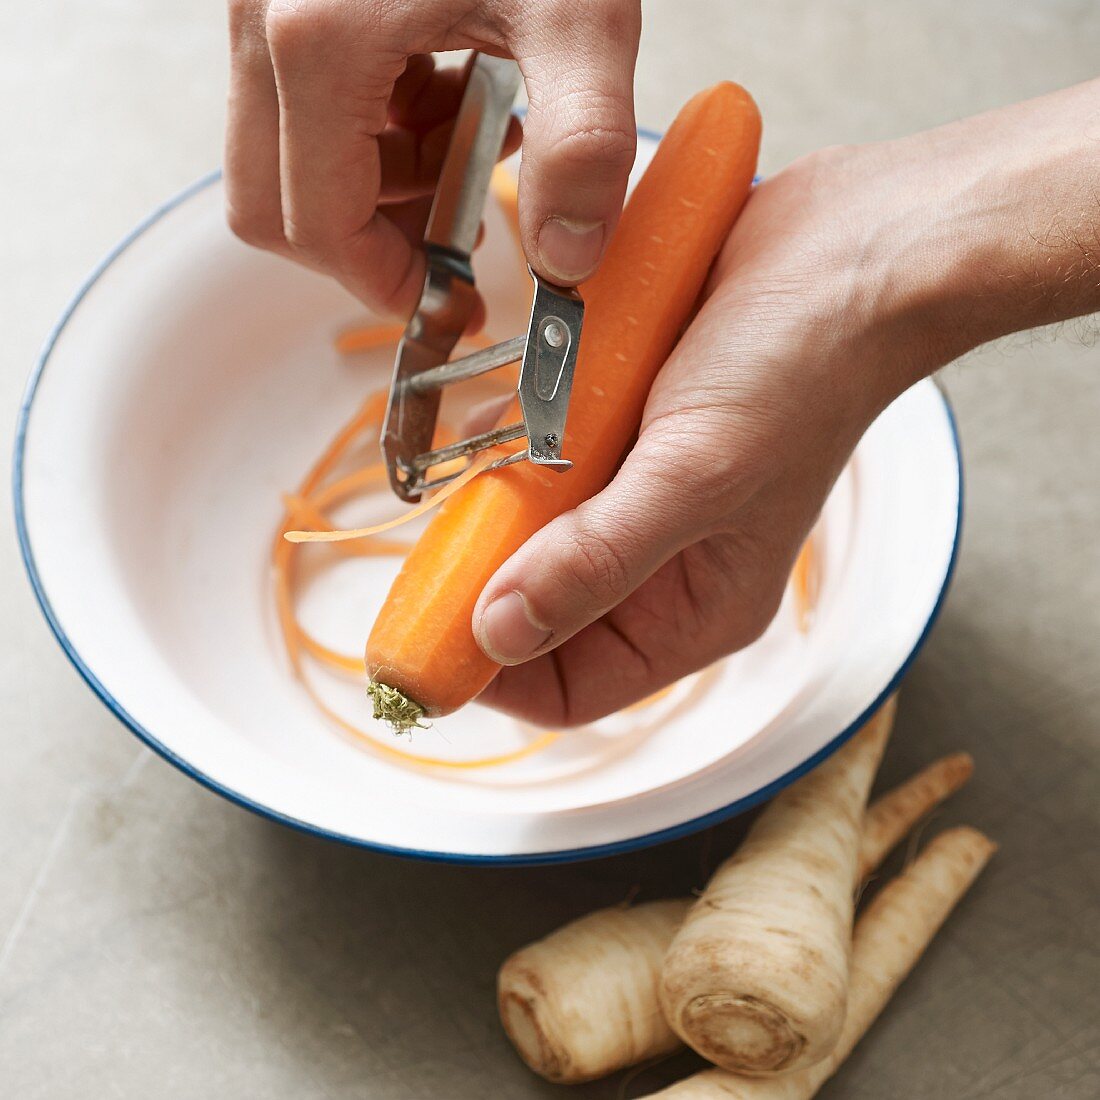 A carrot being grated